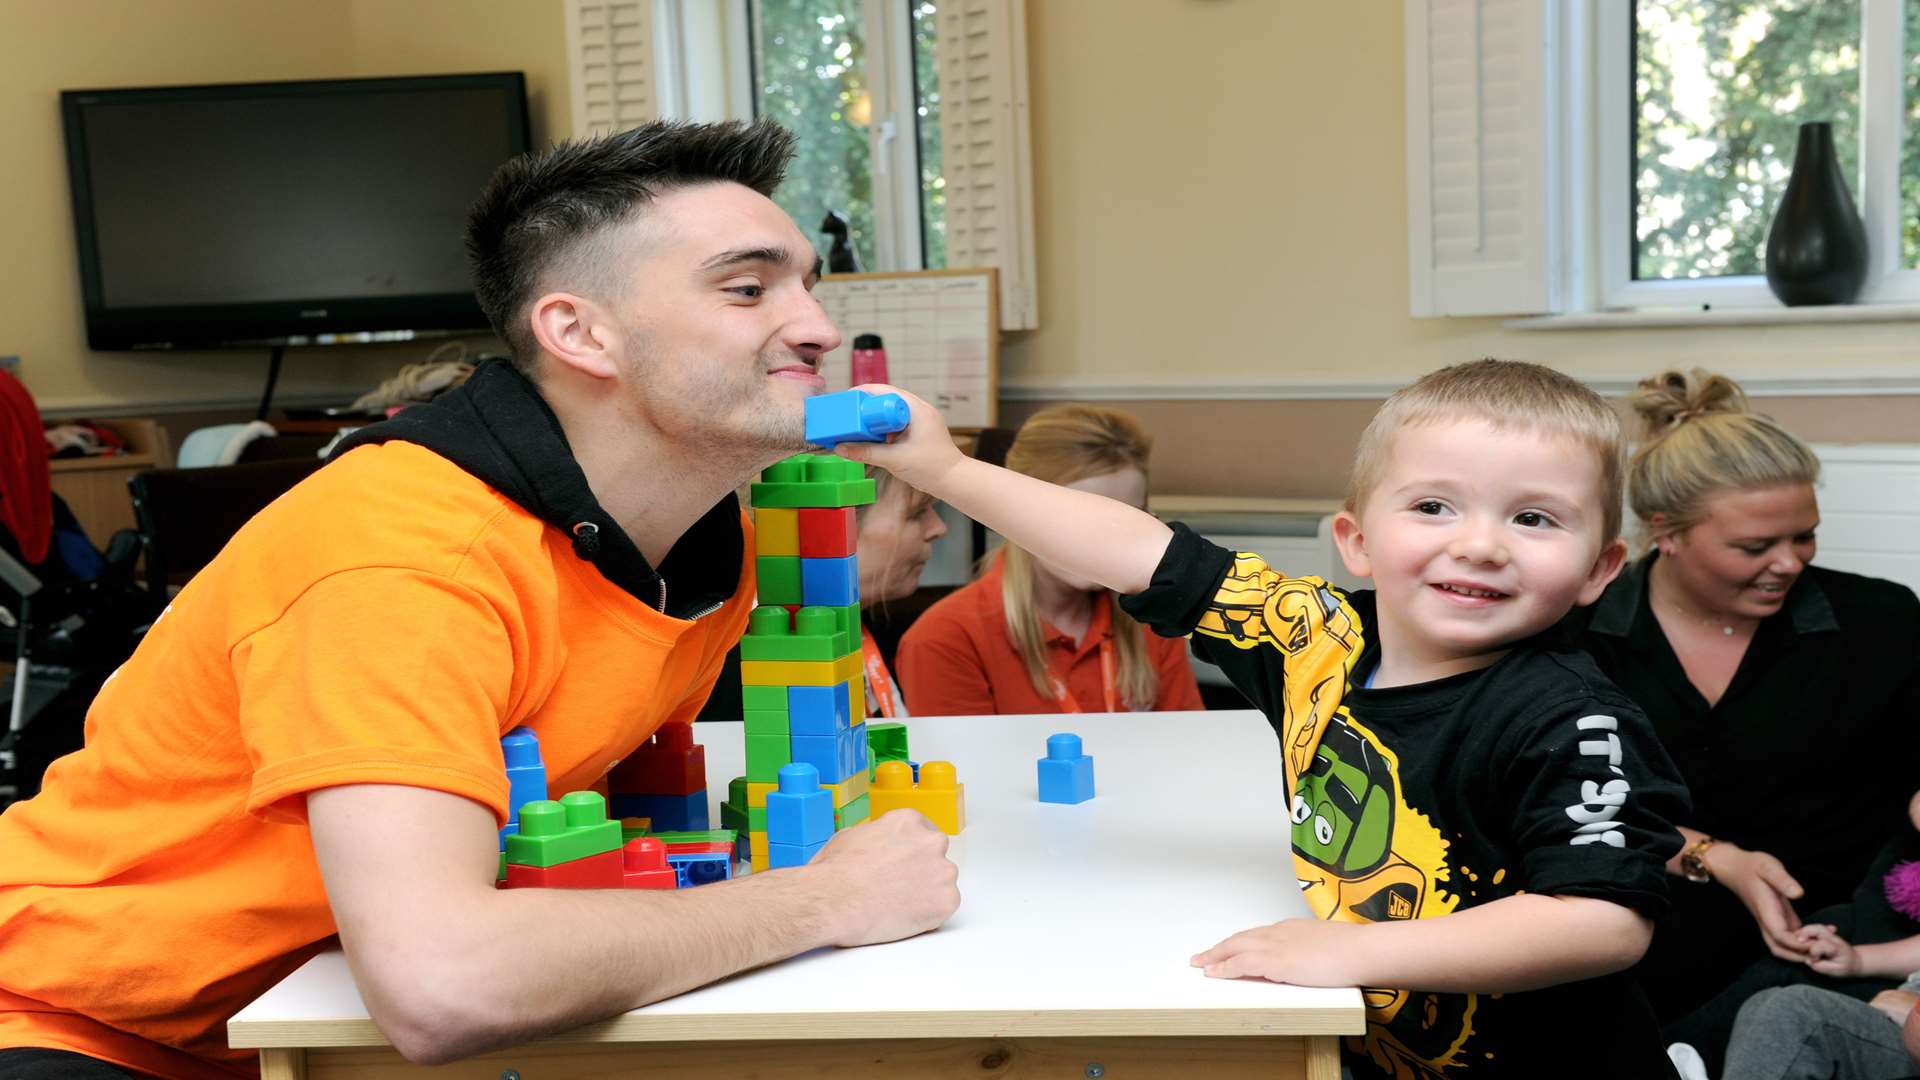 Tom Parker, from The Wanted, has fun with a young boy supported by hospice charity ellenor